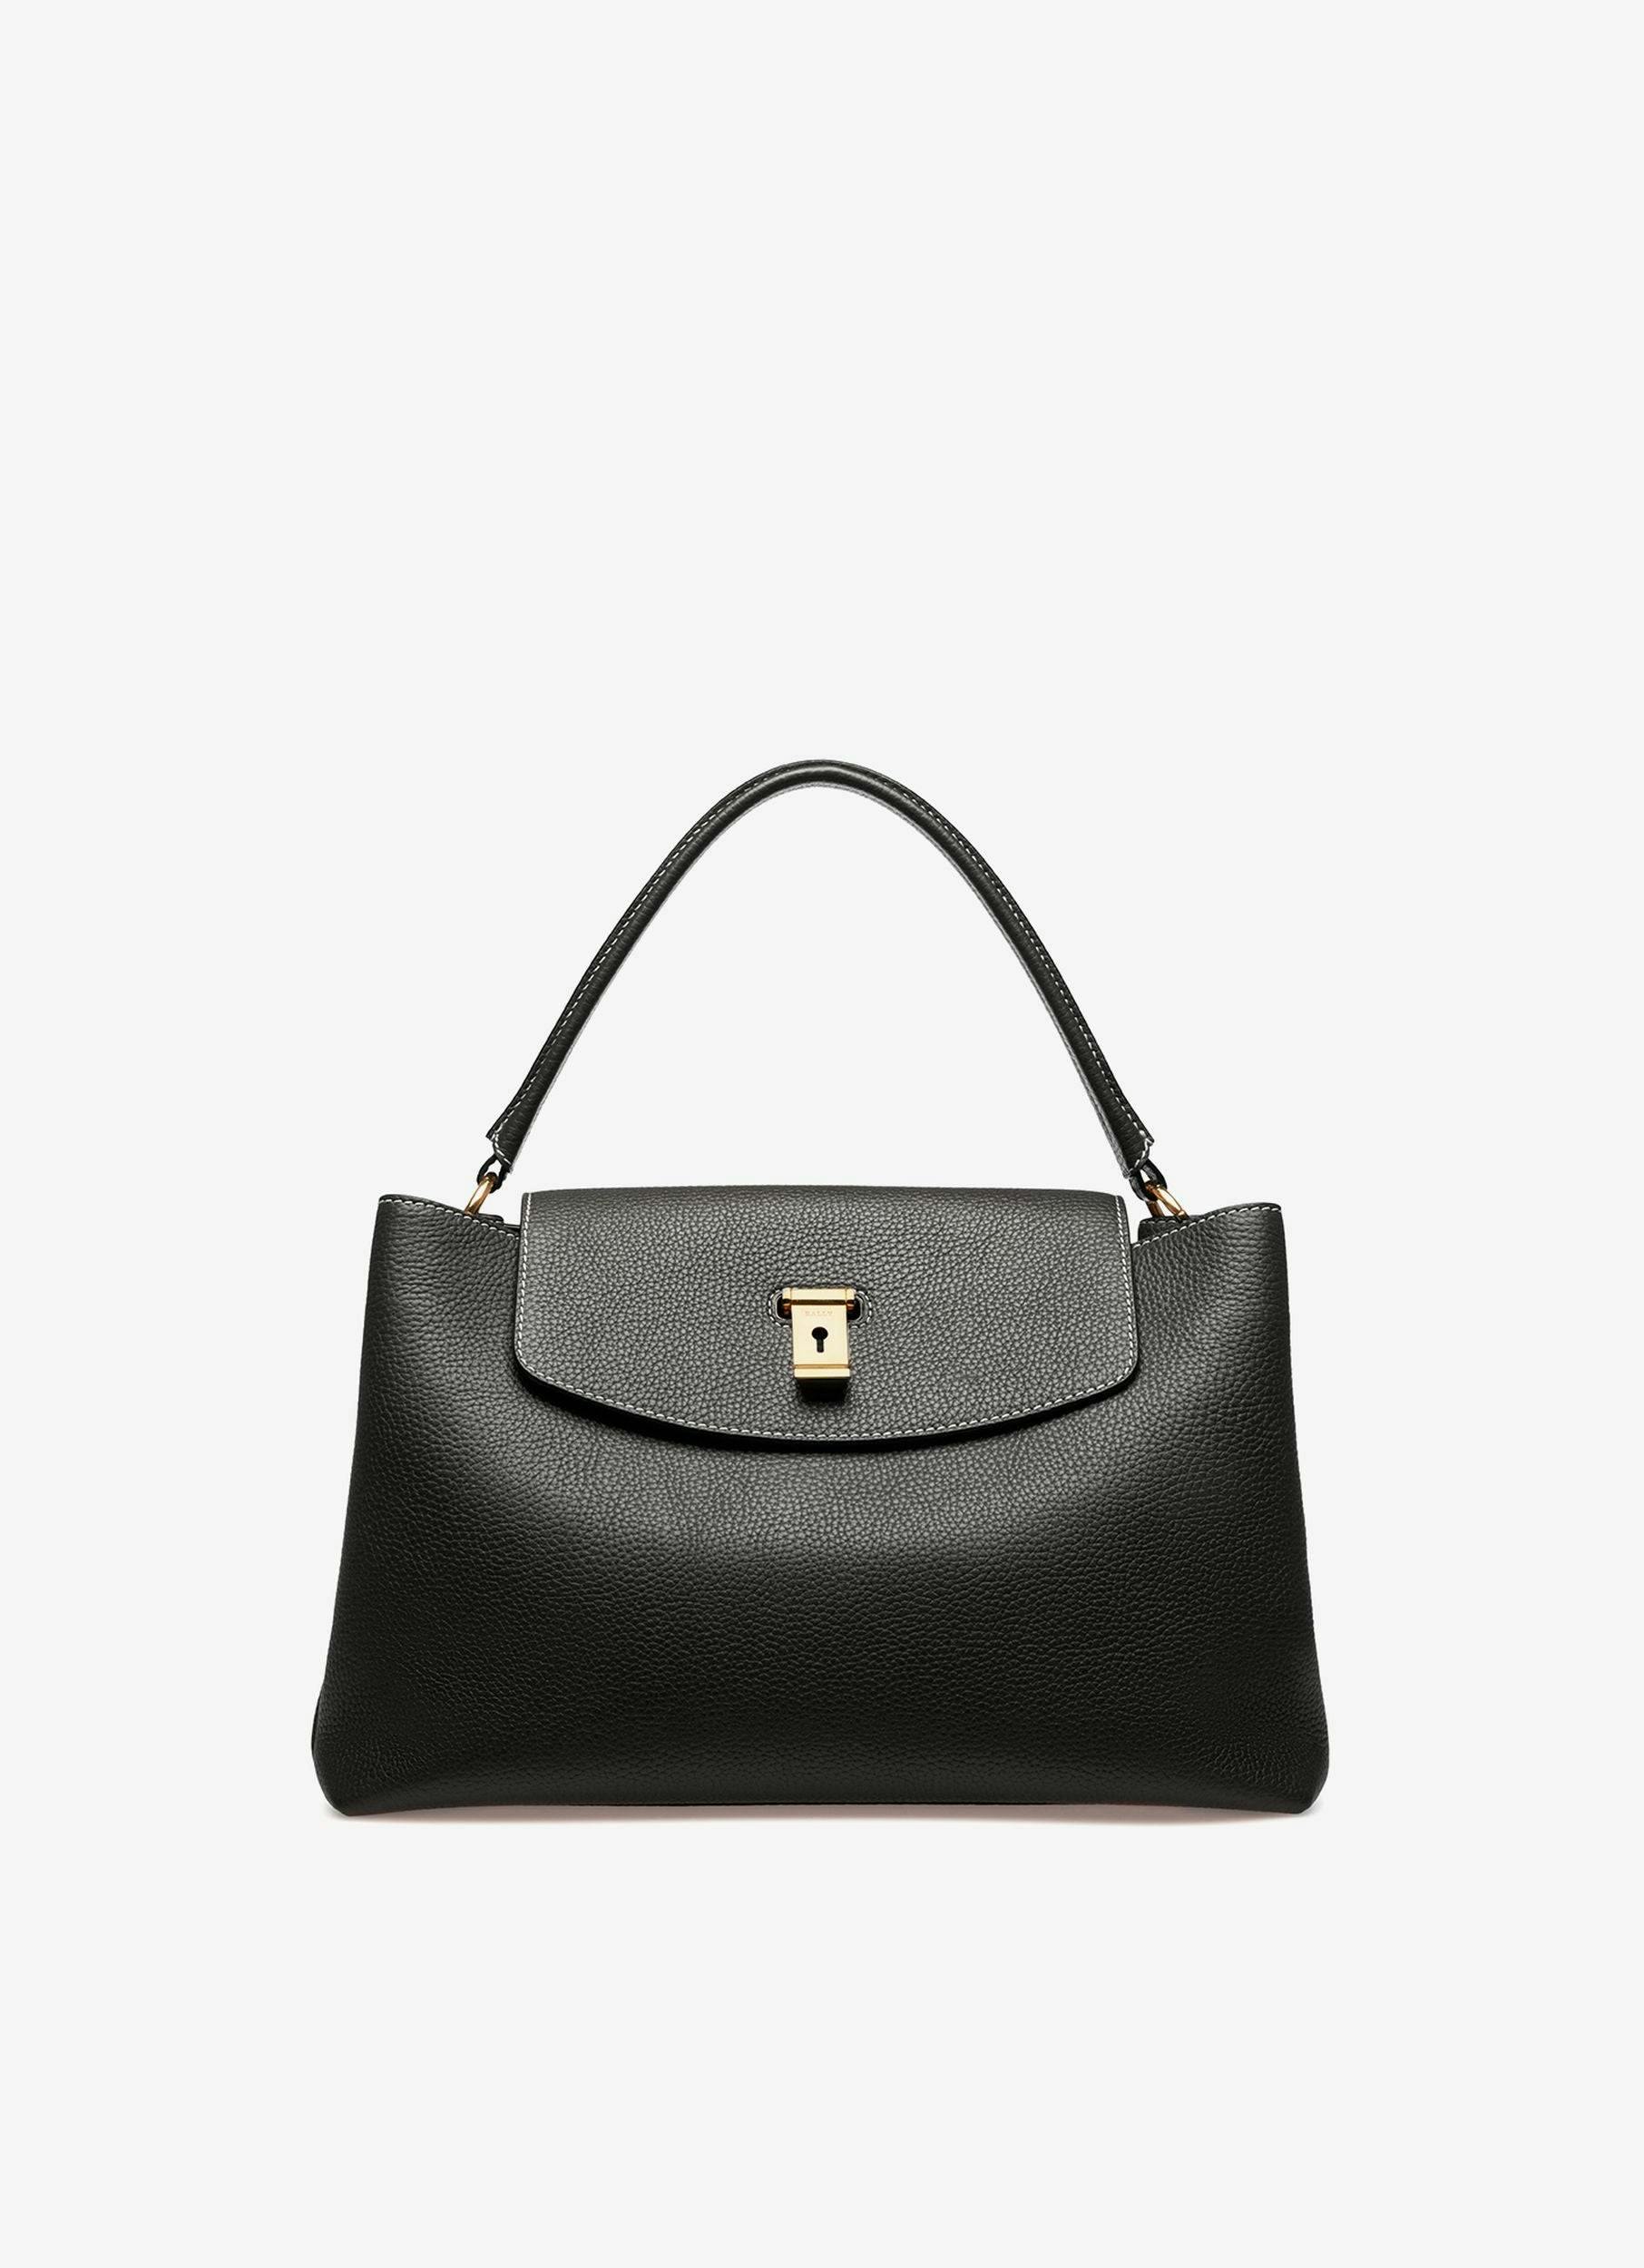 Women's Lock Me Top Handle Bag In Black Leather | Bally | Still Life Front